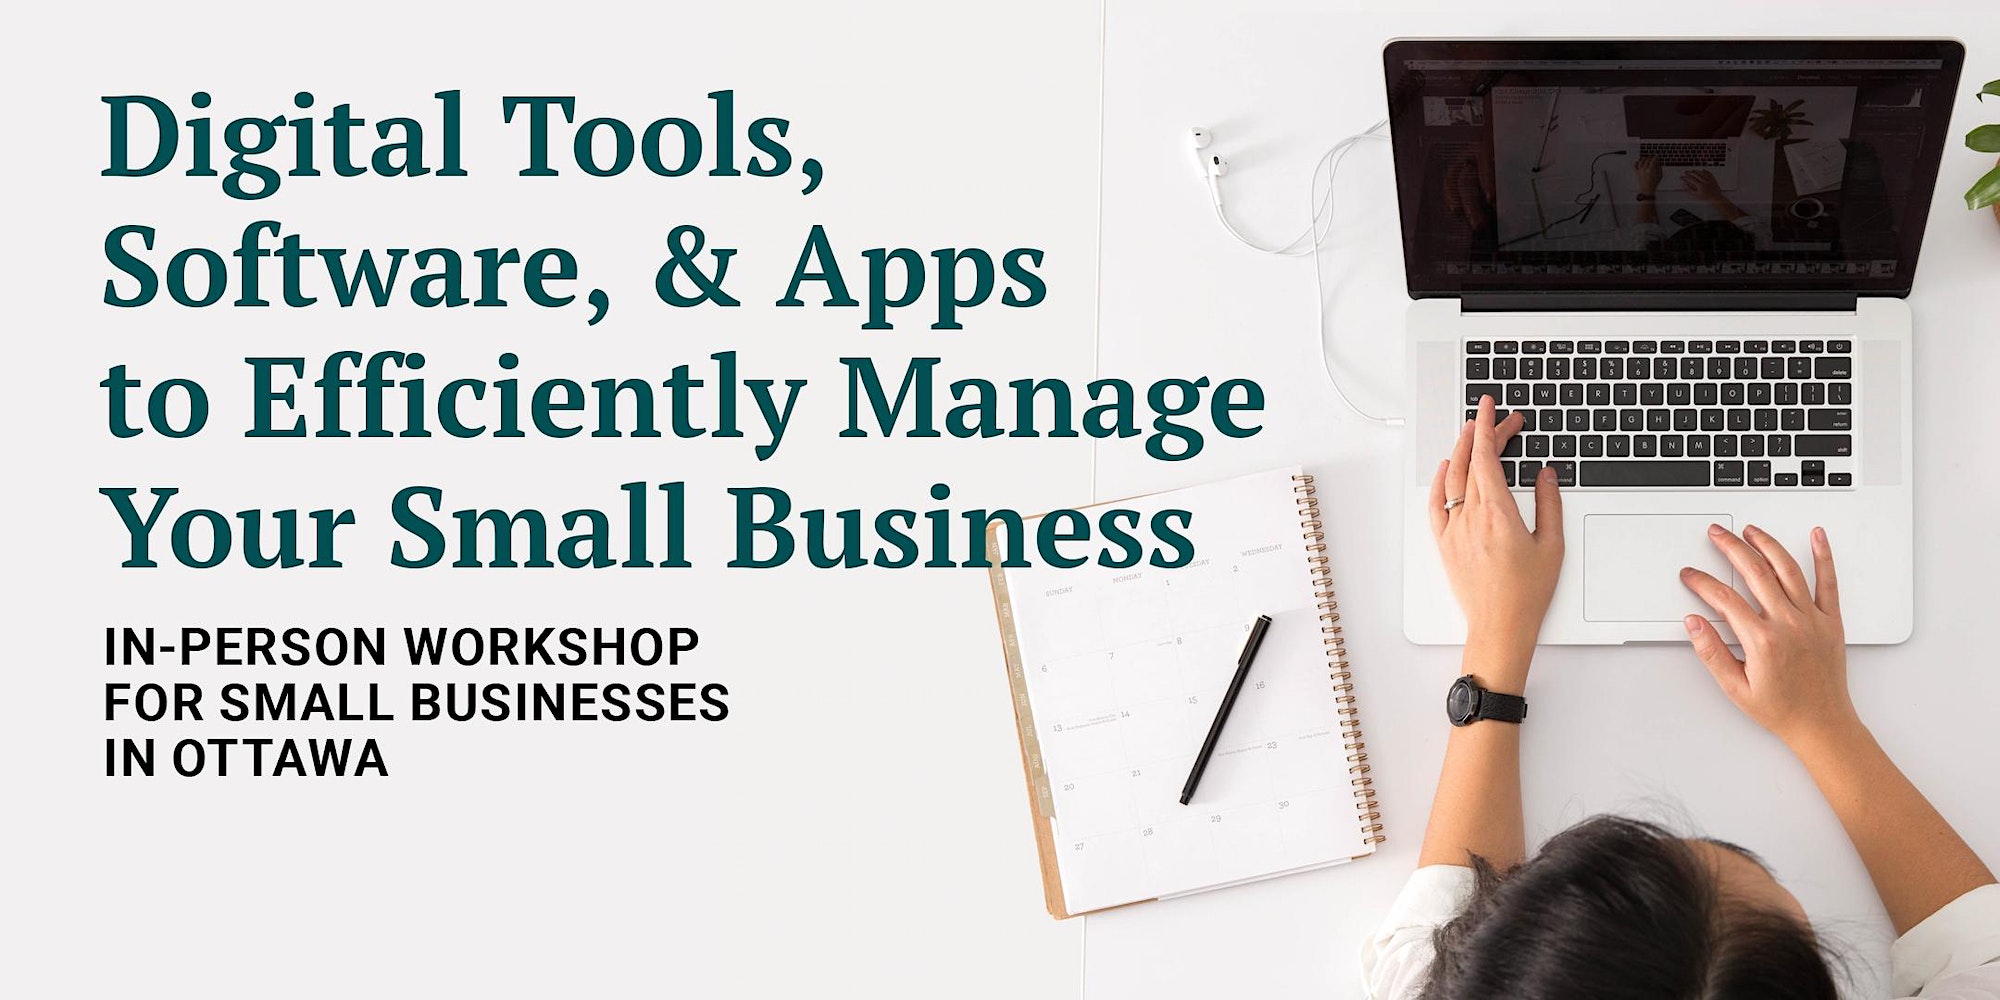 Digital Tools, Software, & Apps to Efficiently Manage Your Small Business: In-person workshop for small businesses in Ottawa